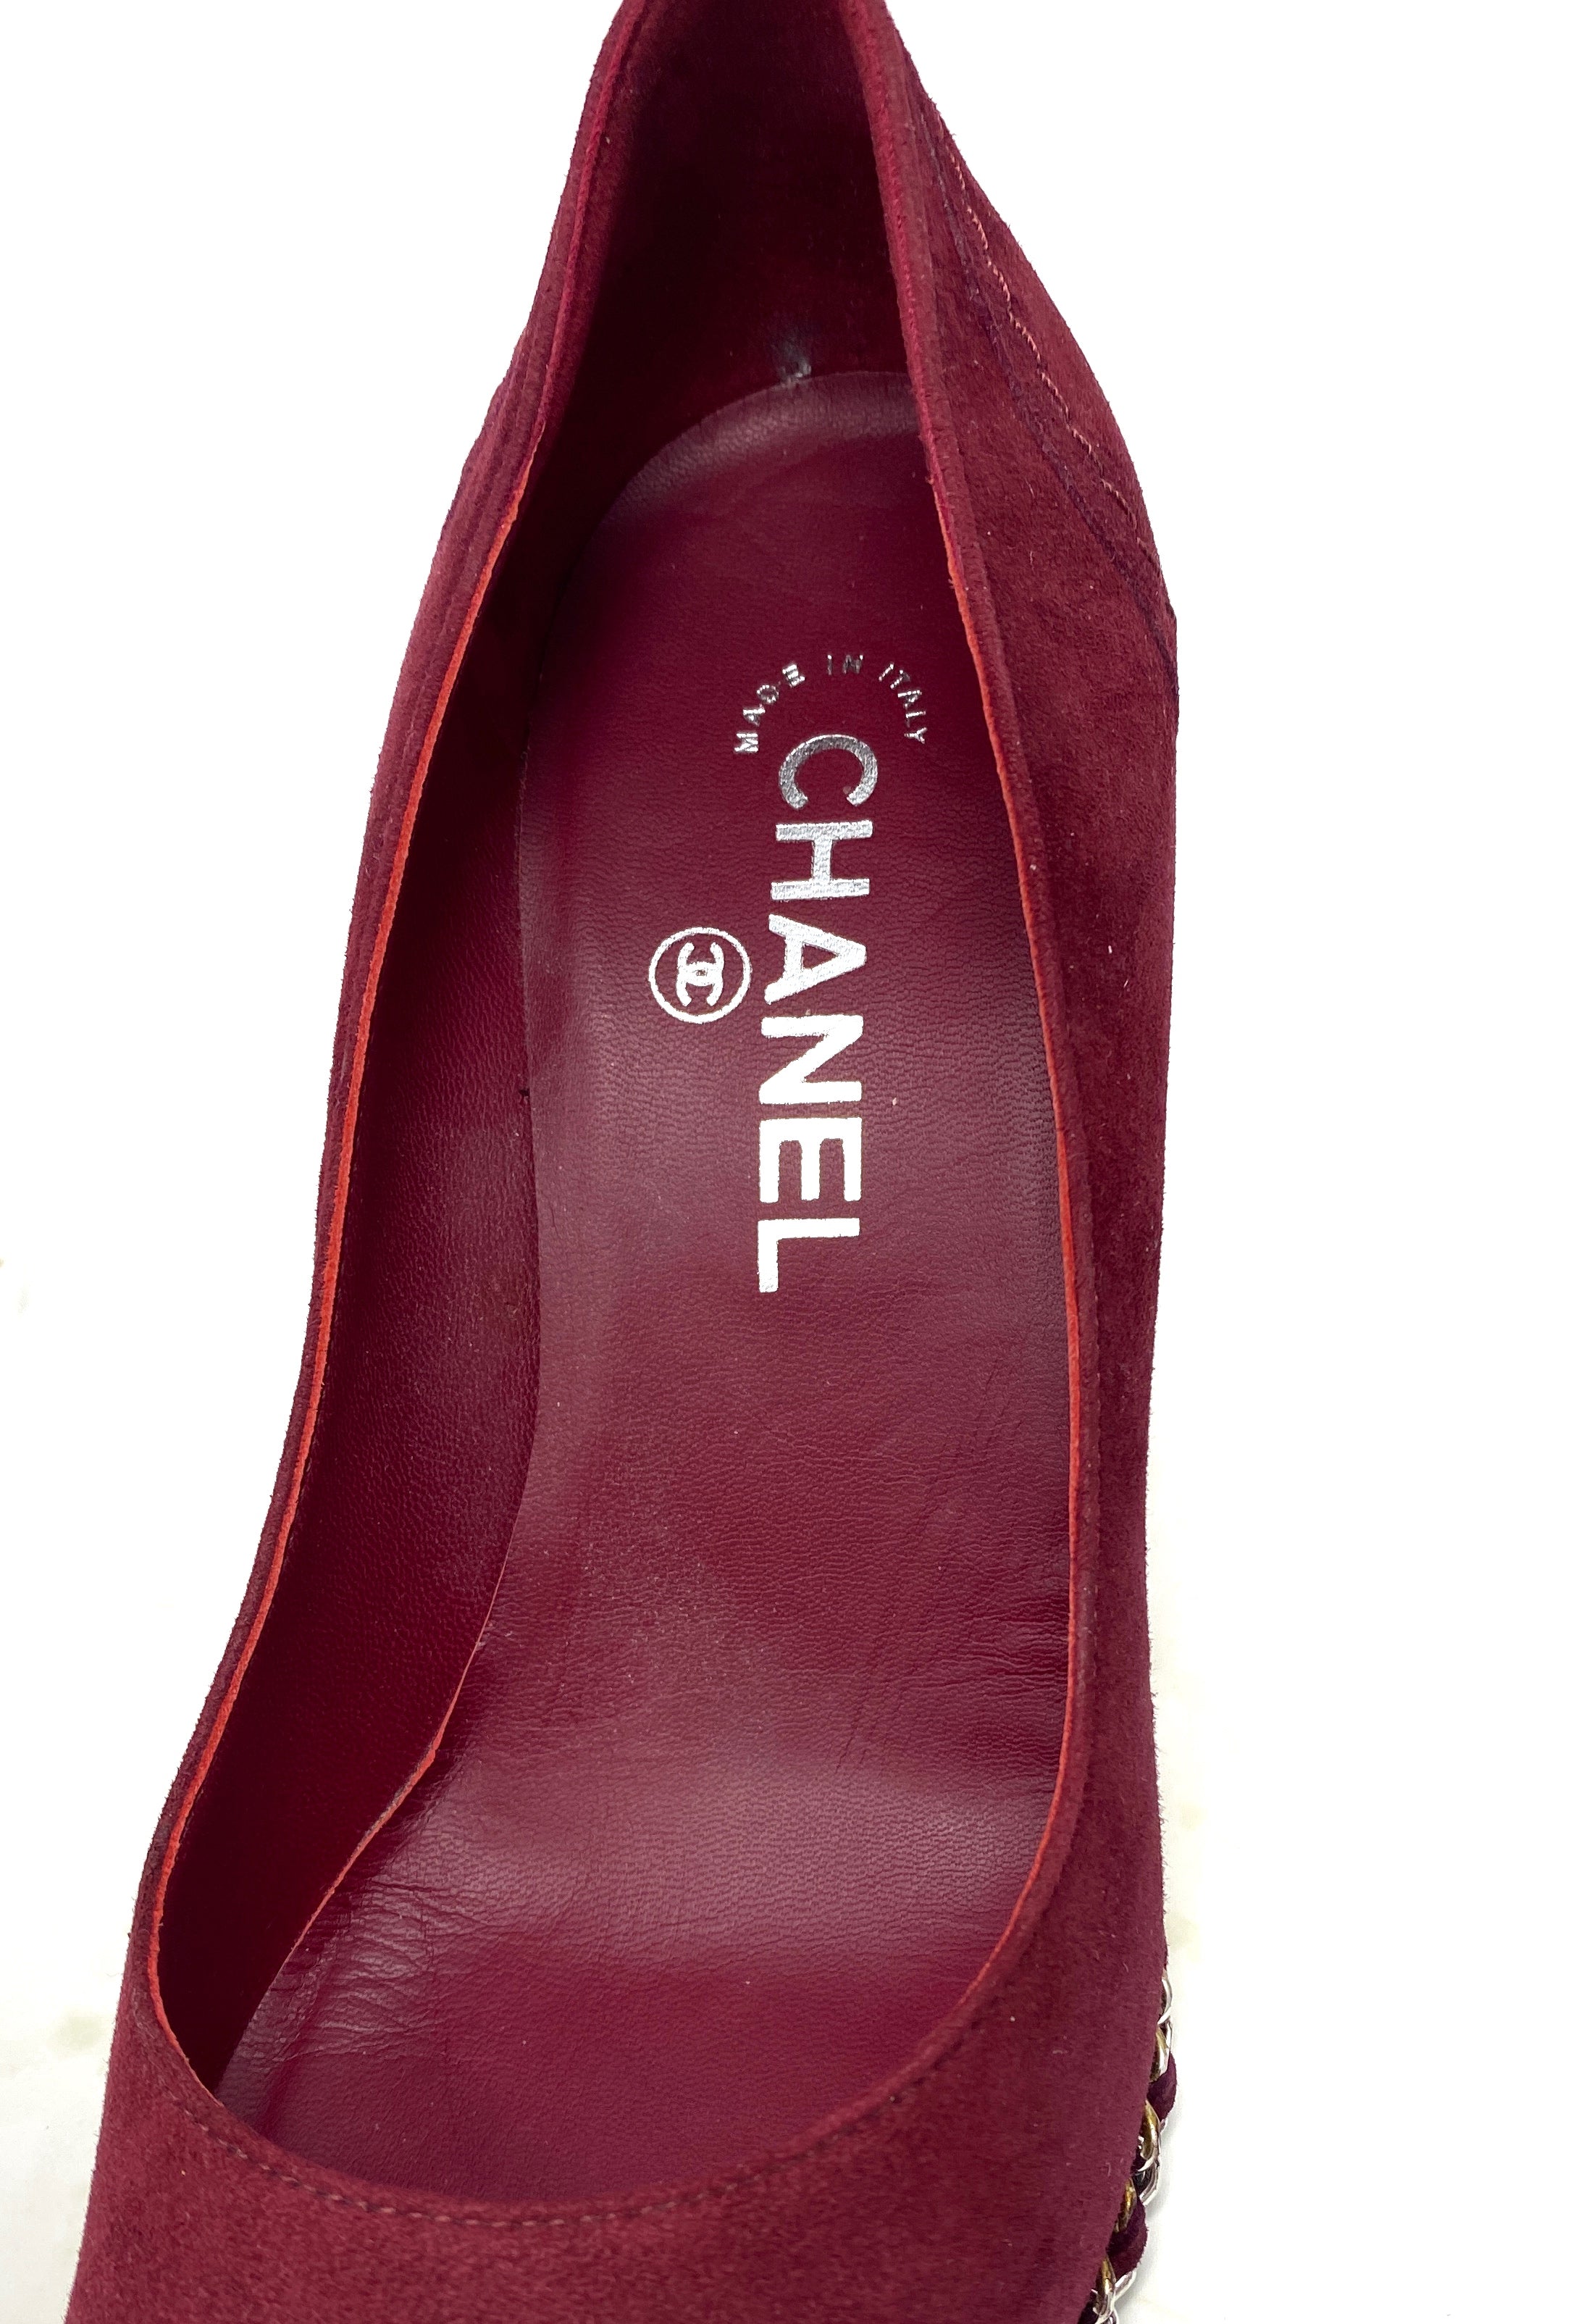 chanel wedges, burgundy and black leather, with chain, size 38.